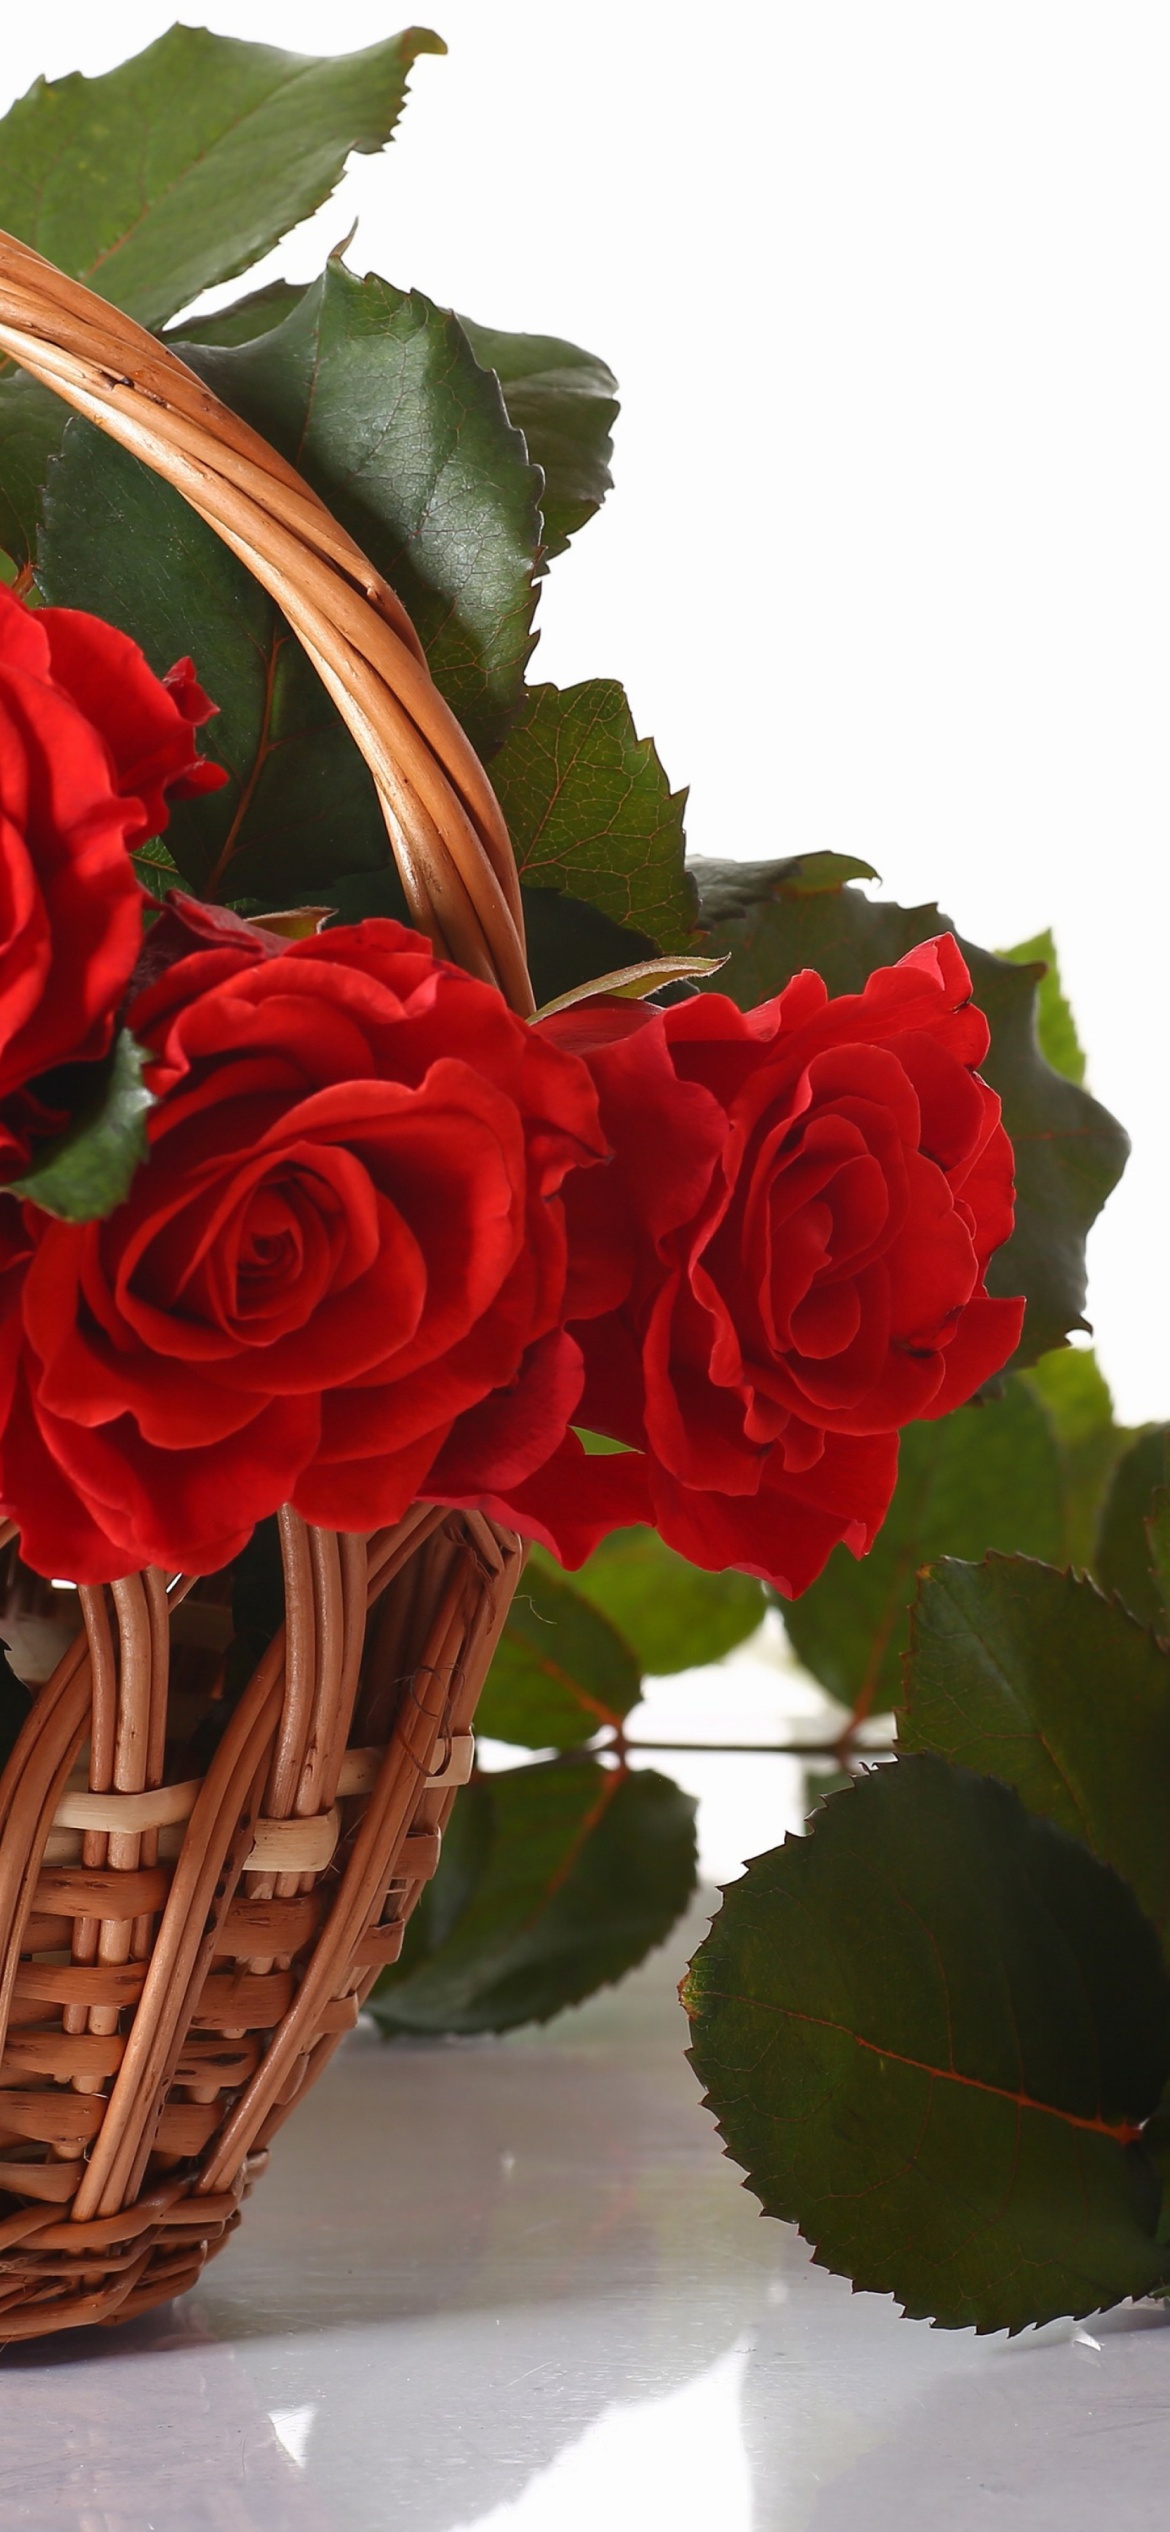 Basket with Roses wallpaper 1170x2532